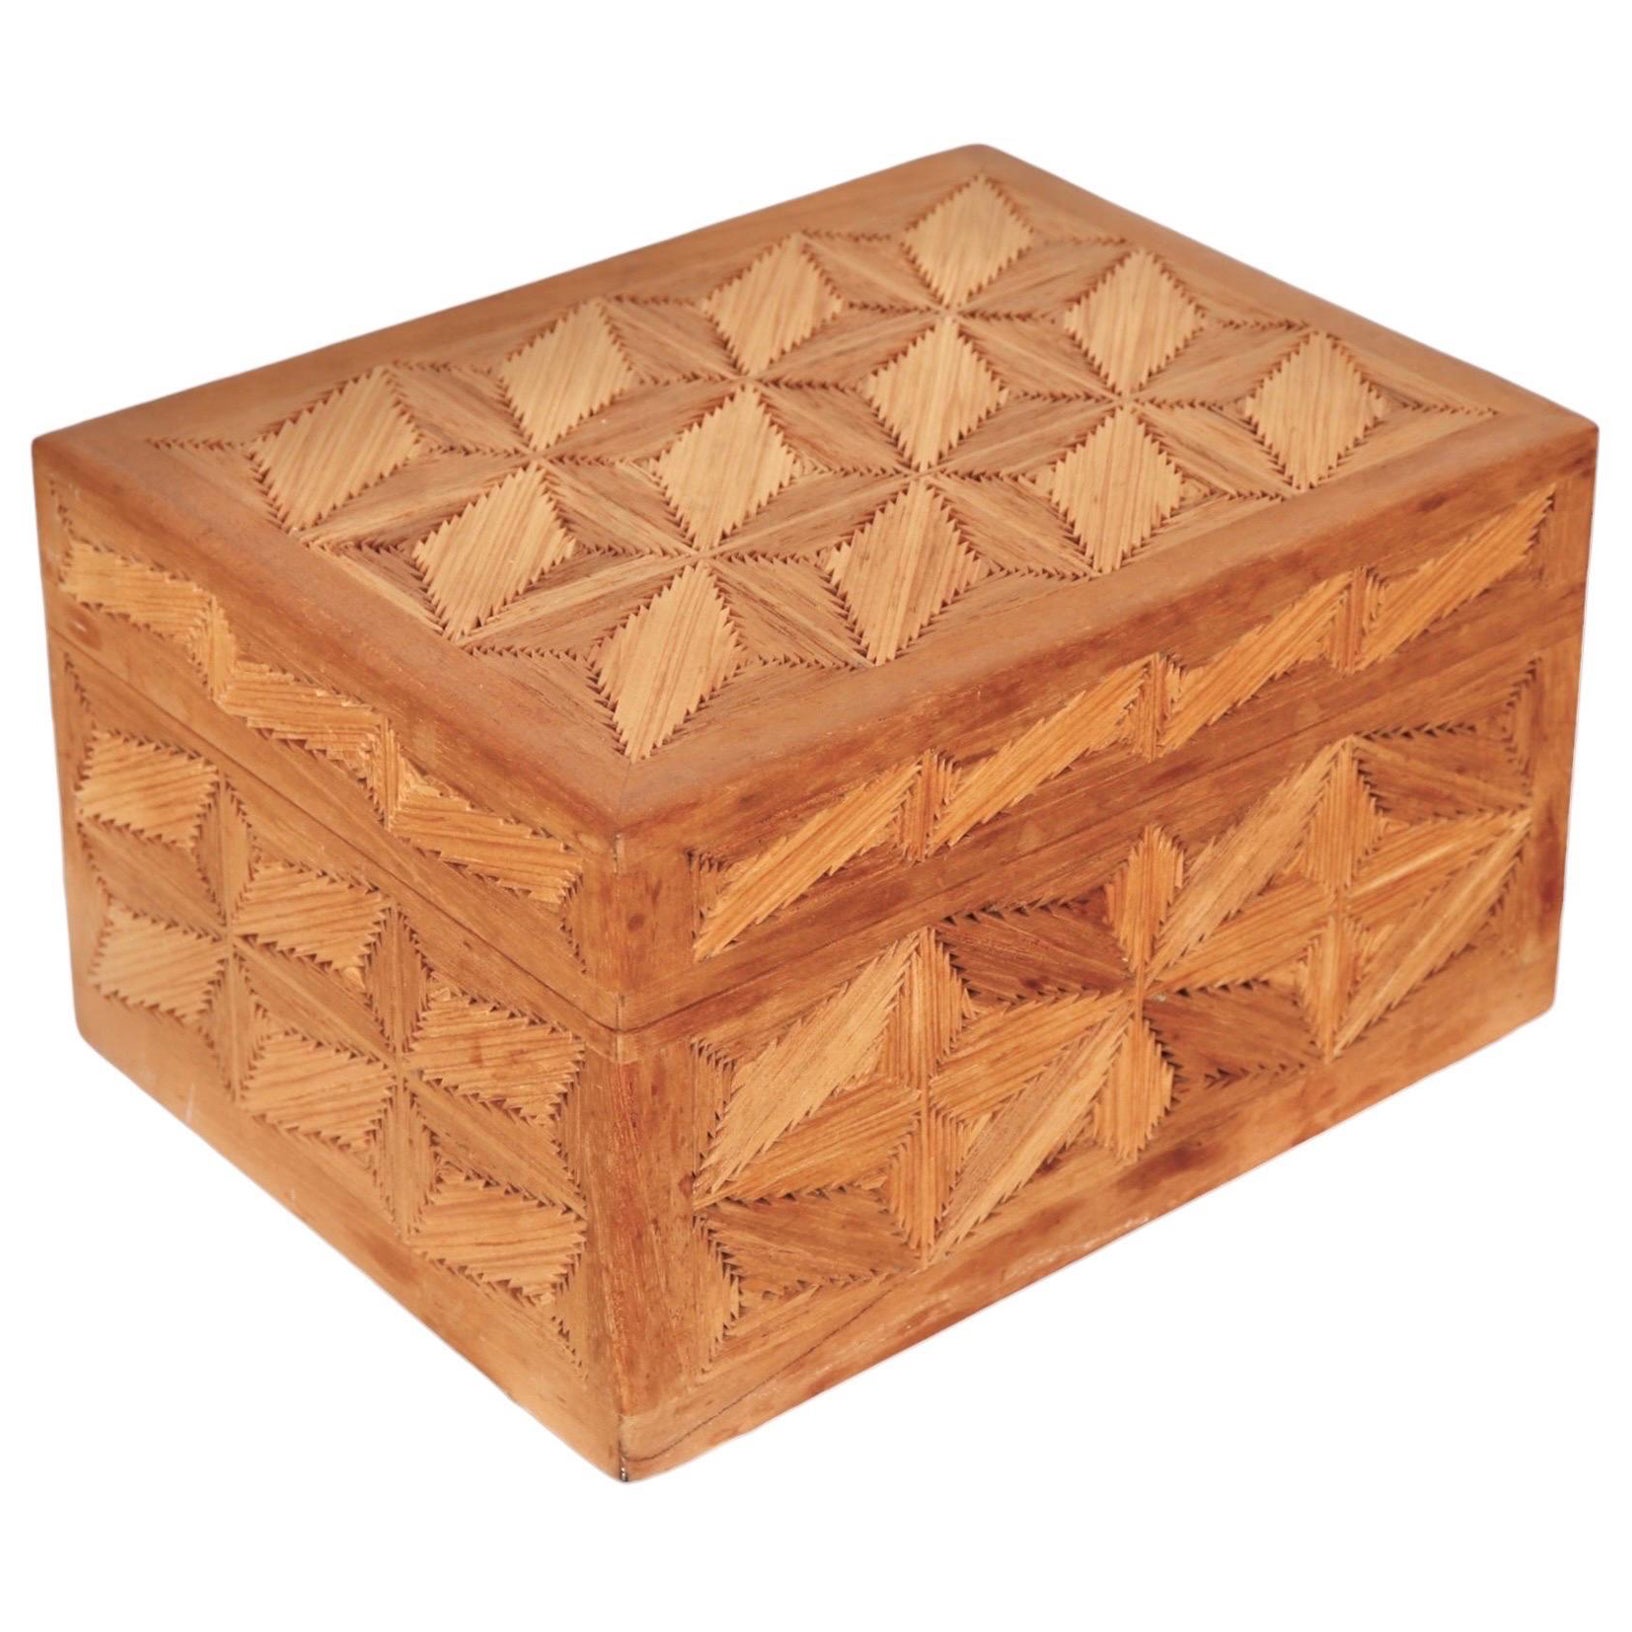 Inlaid Wooden Trinket Box For Sale